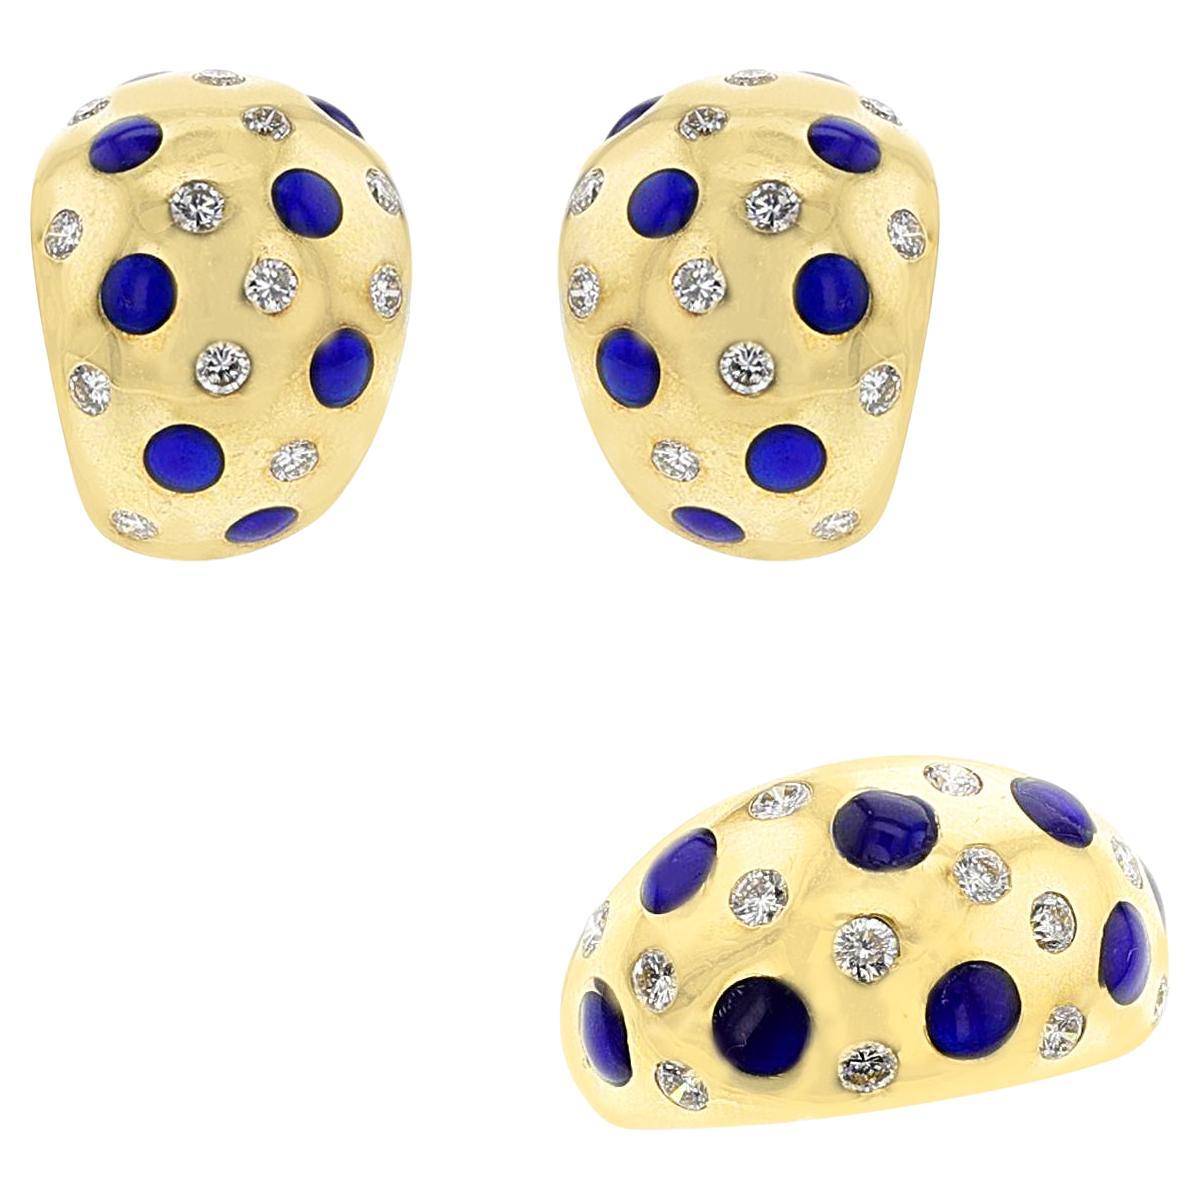 Van Cleef & Arpels Plique a Jour Enamel and Diamond Earring and Ring Set, 18k For Sale